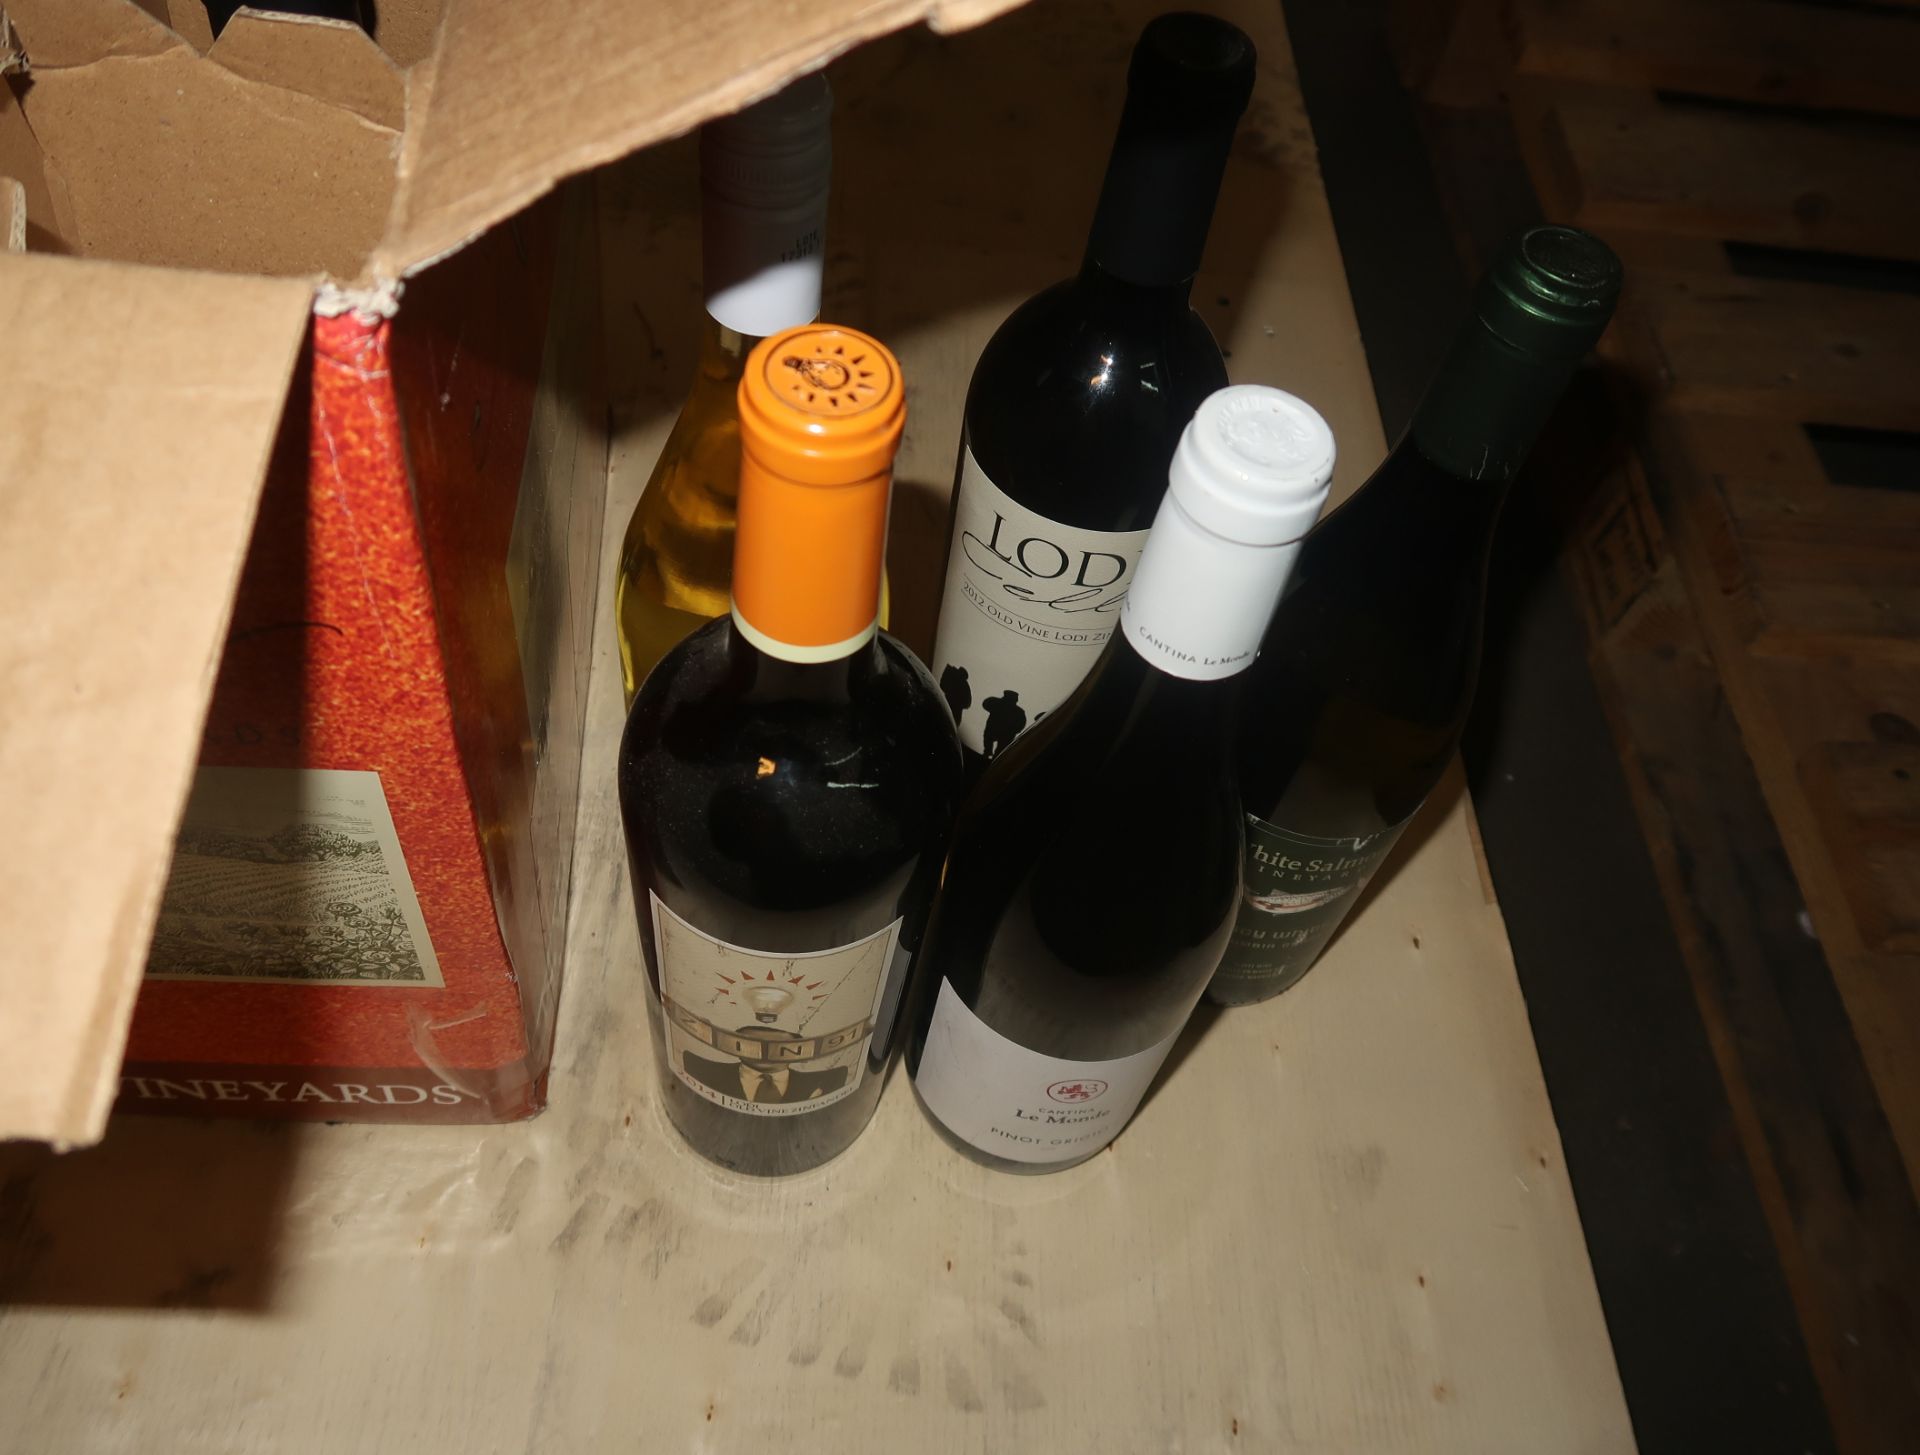 20 BOTTLES, ASST. WINE, VARIETY PACK, BUY OF THE DAY! - Image 2 of 2